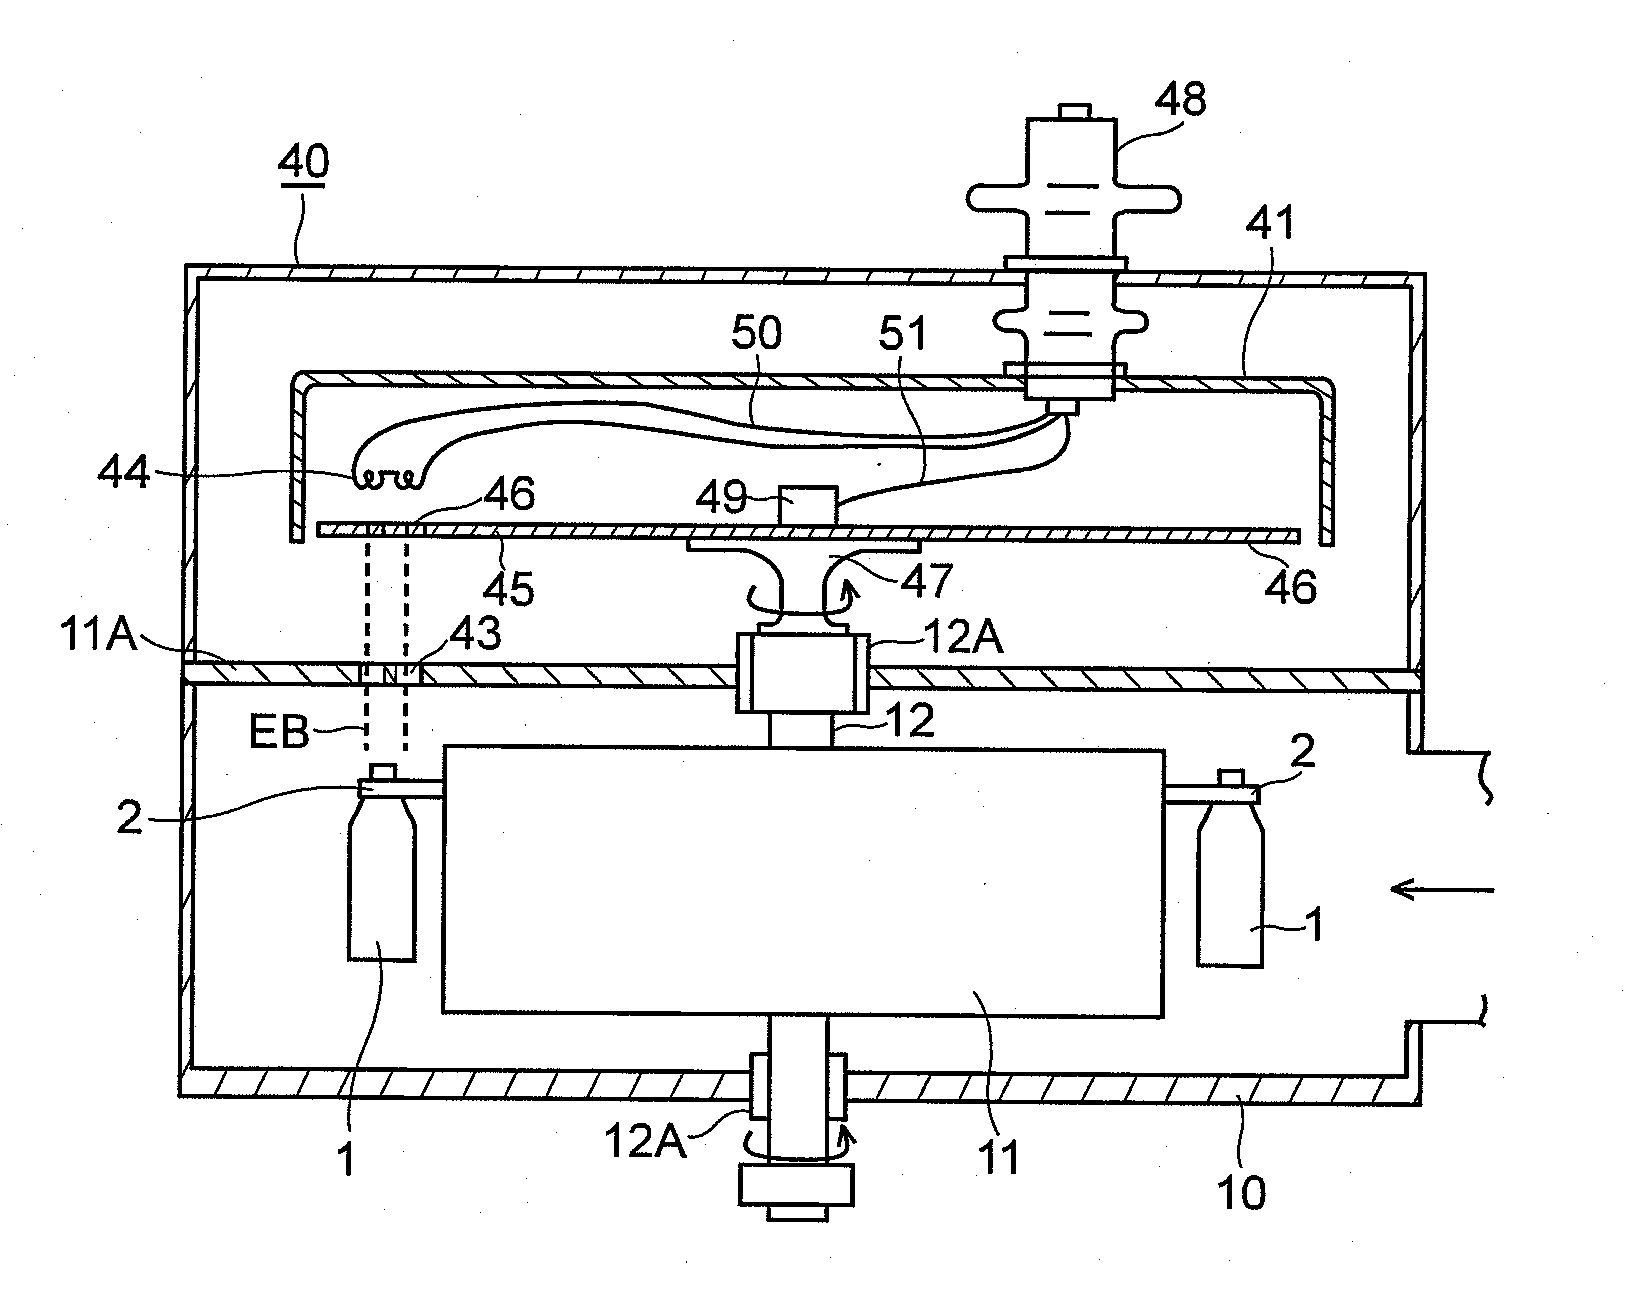 Electron beam irradiation apparatus for open-mouthed containers